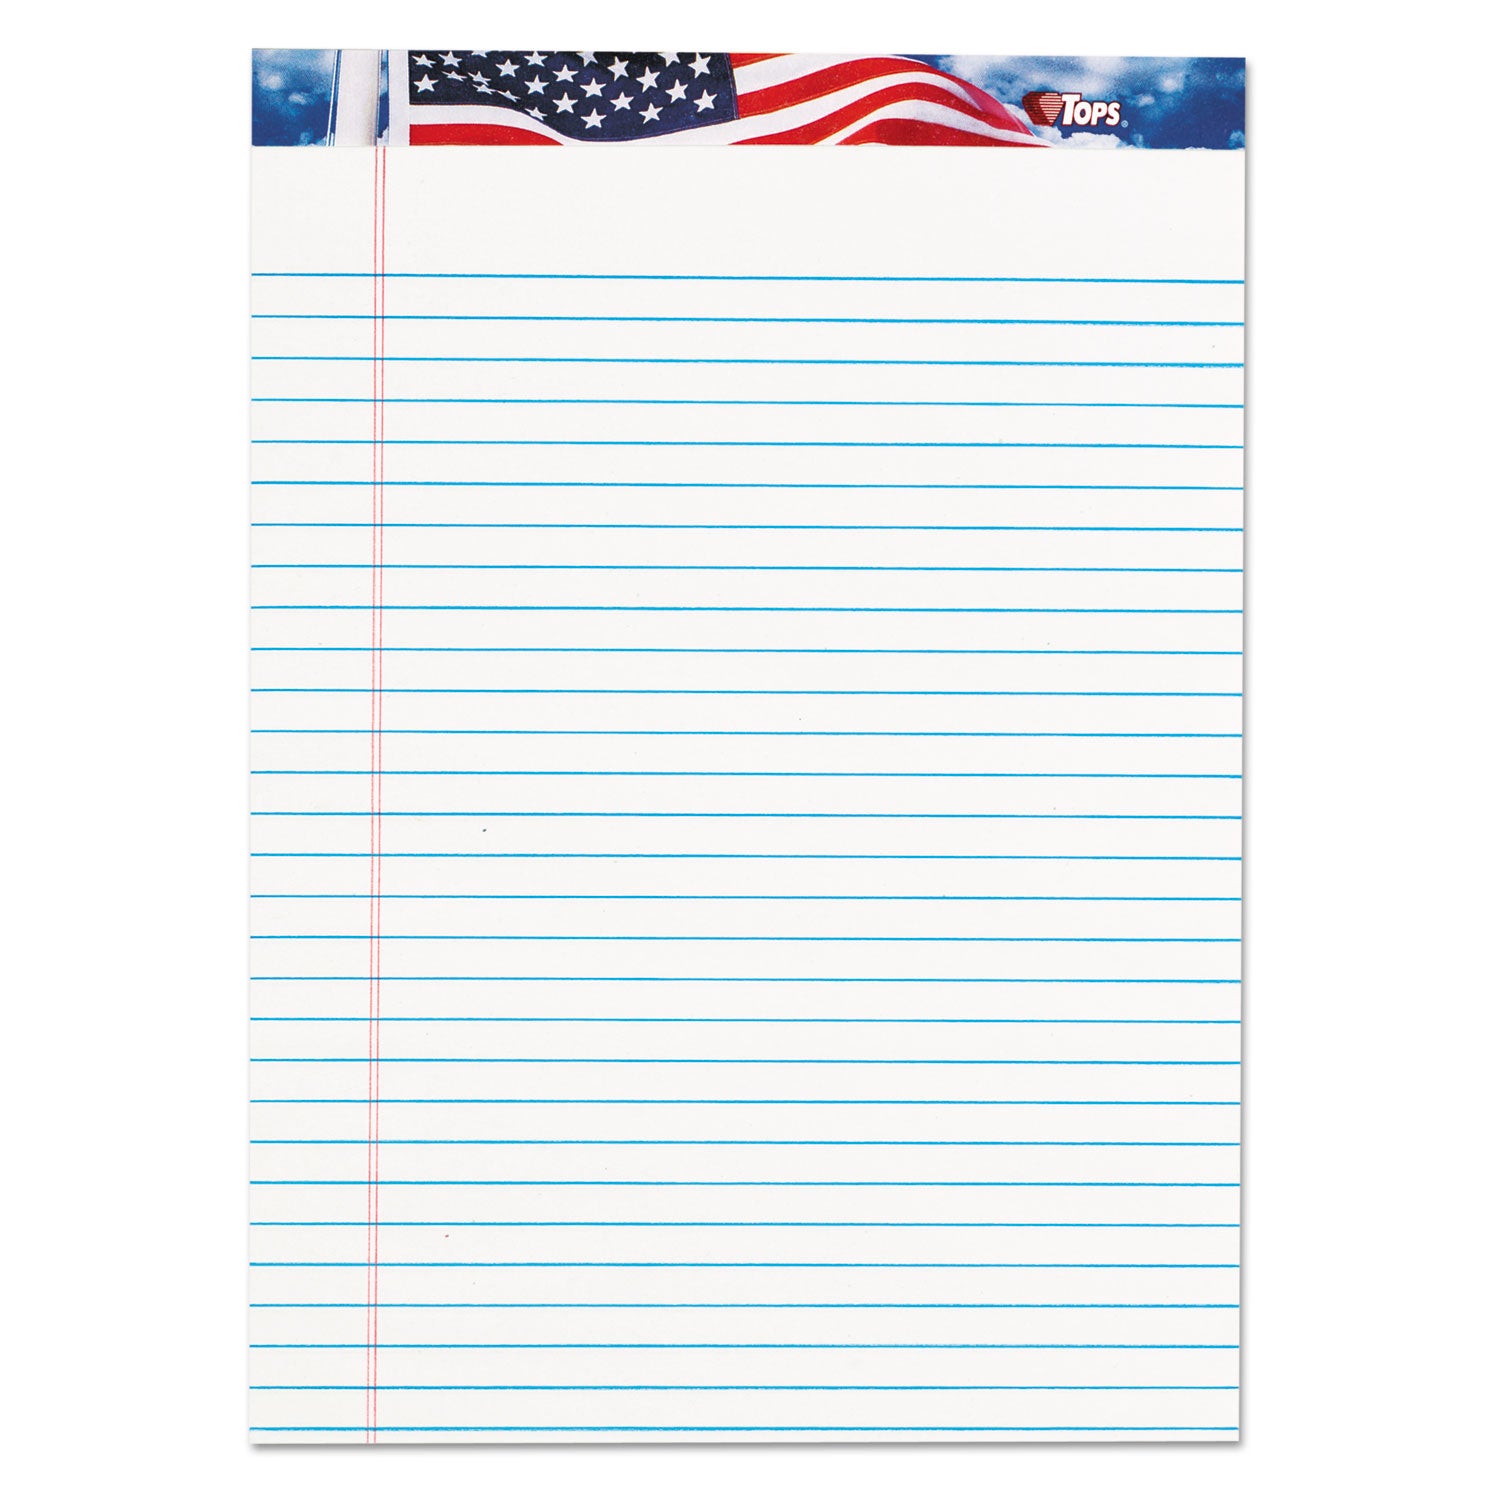 American Pride Writing Pad, Wide/Legal Rule, Red/White/Blue Headband, 50 White 8.5 x 11.75 Sheets, 12/Pack - 